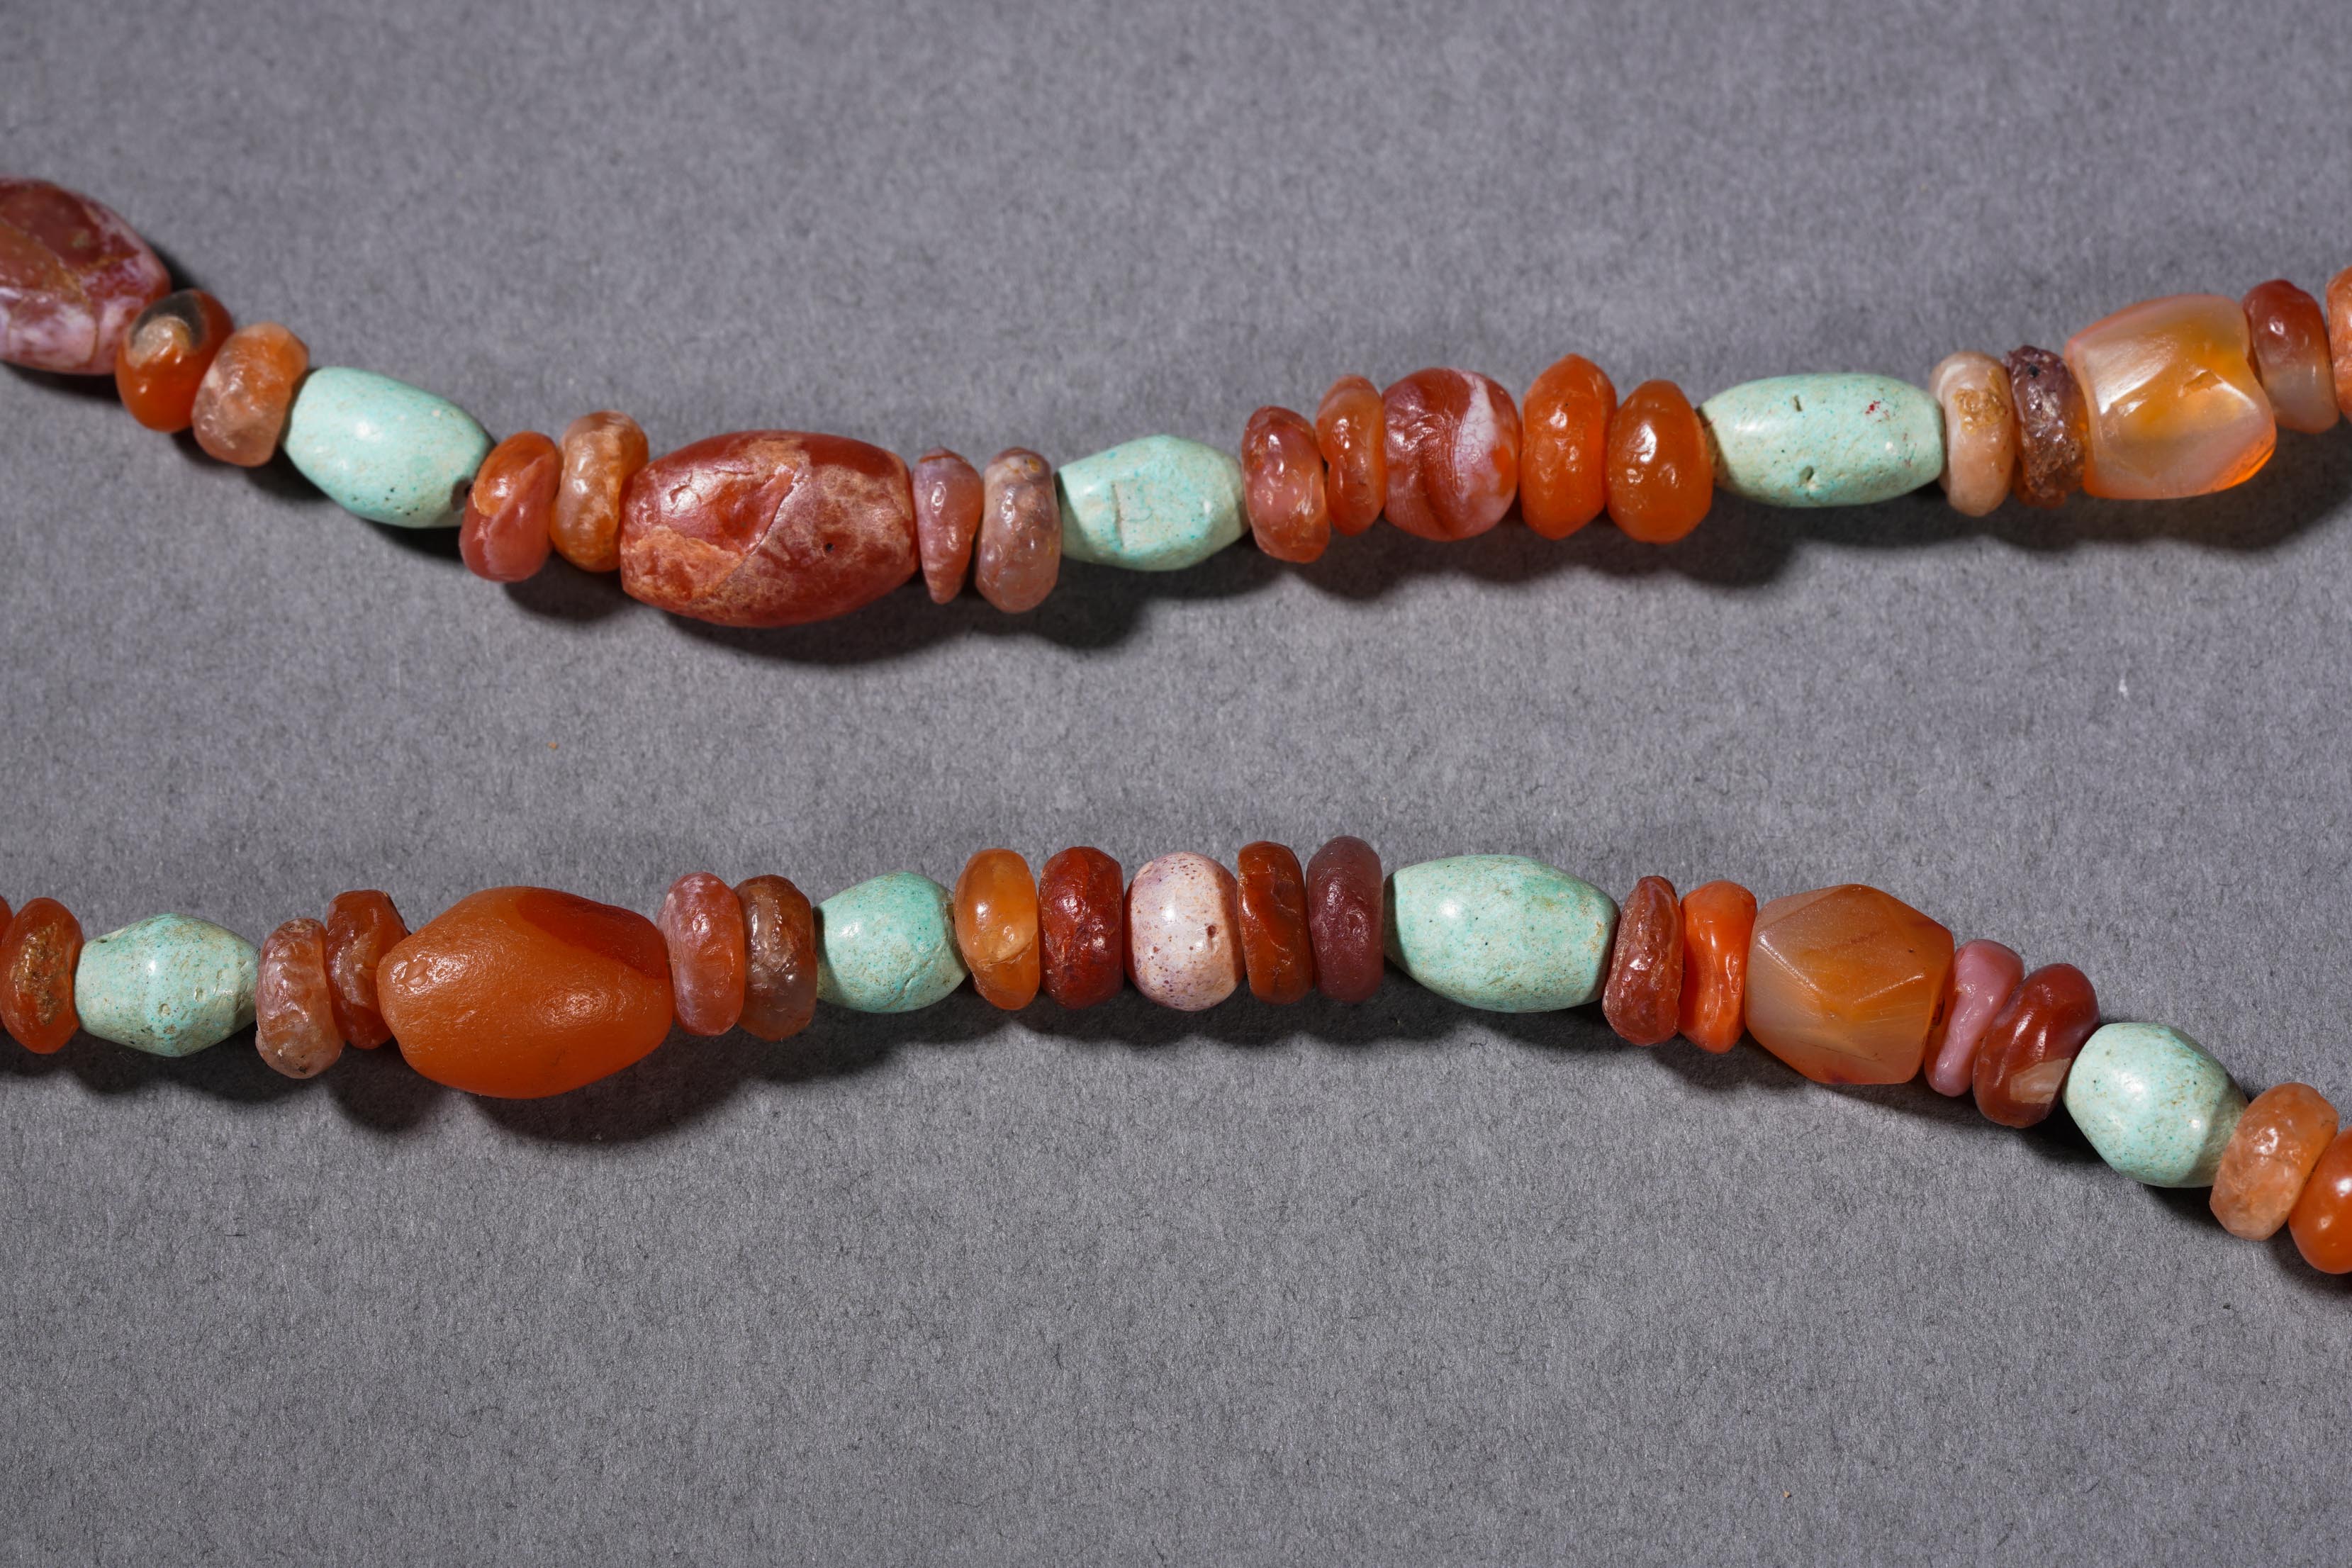 A Chinese Multi-Gems Beads Necklace - Image 3 of 6